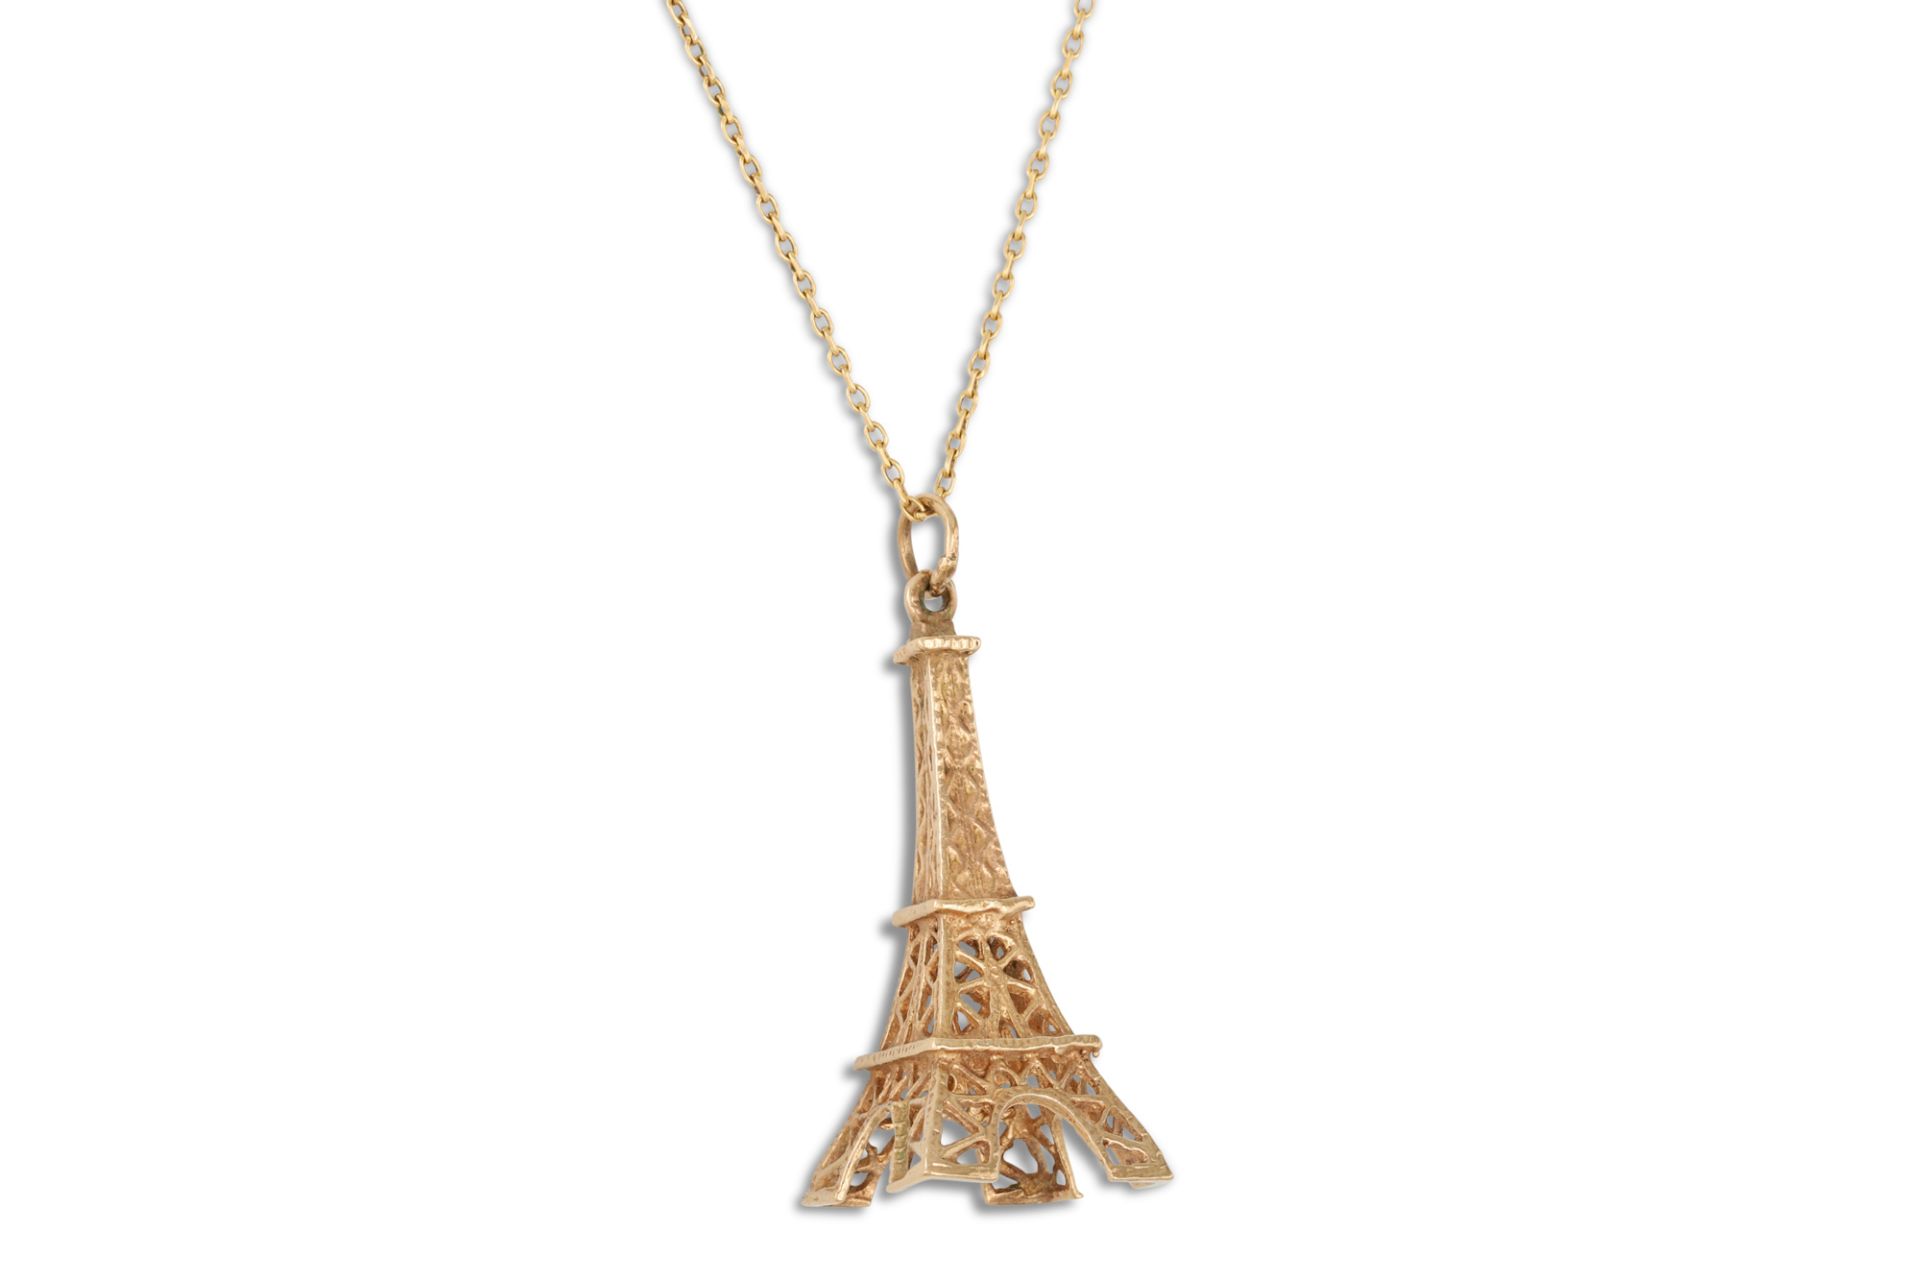 A GOLD CHARM, in the form of the Eiffel Tower, in 9ct gold on a 18ct gold neck chain, gross weight